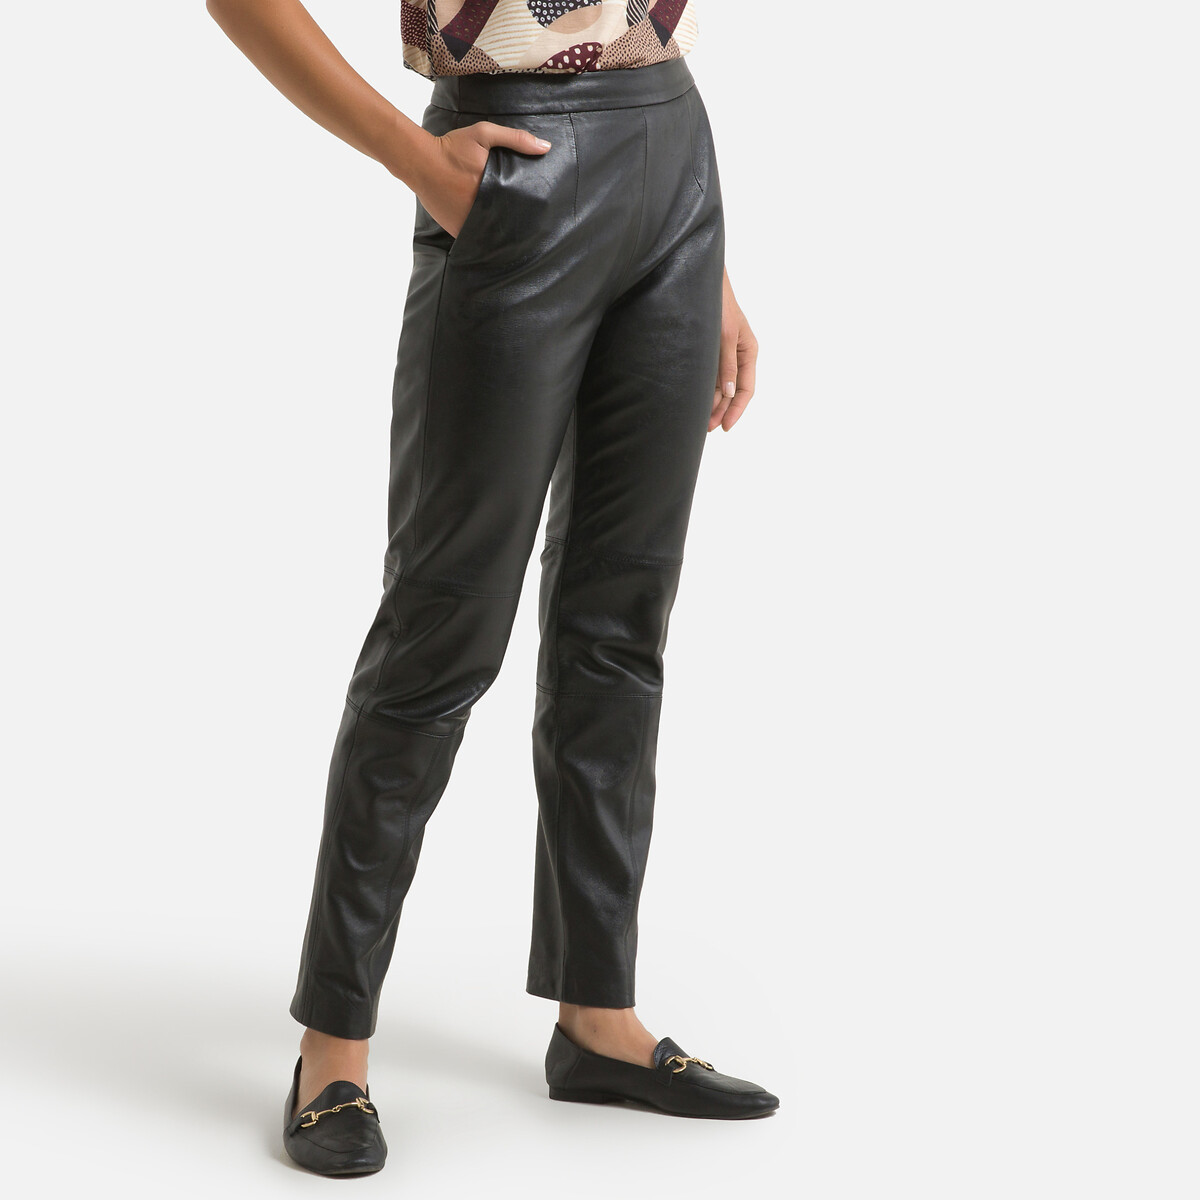 Image of Ankle Grazer Peg Trousers in Leather, Length 27"